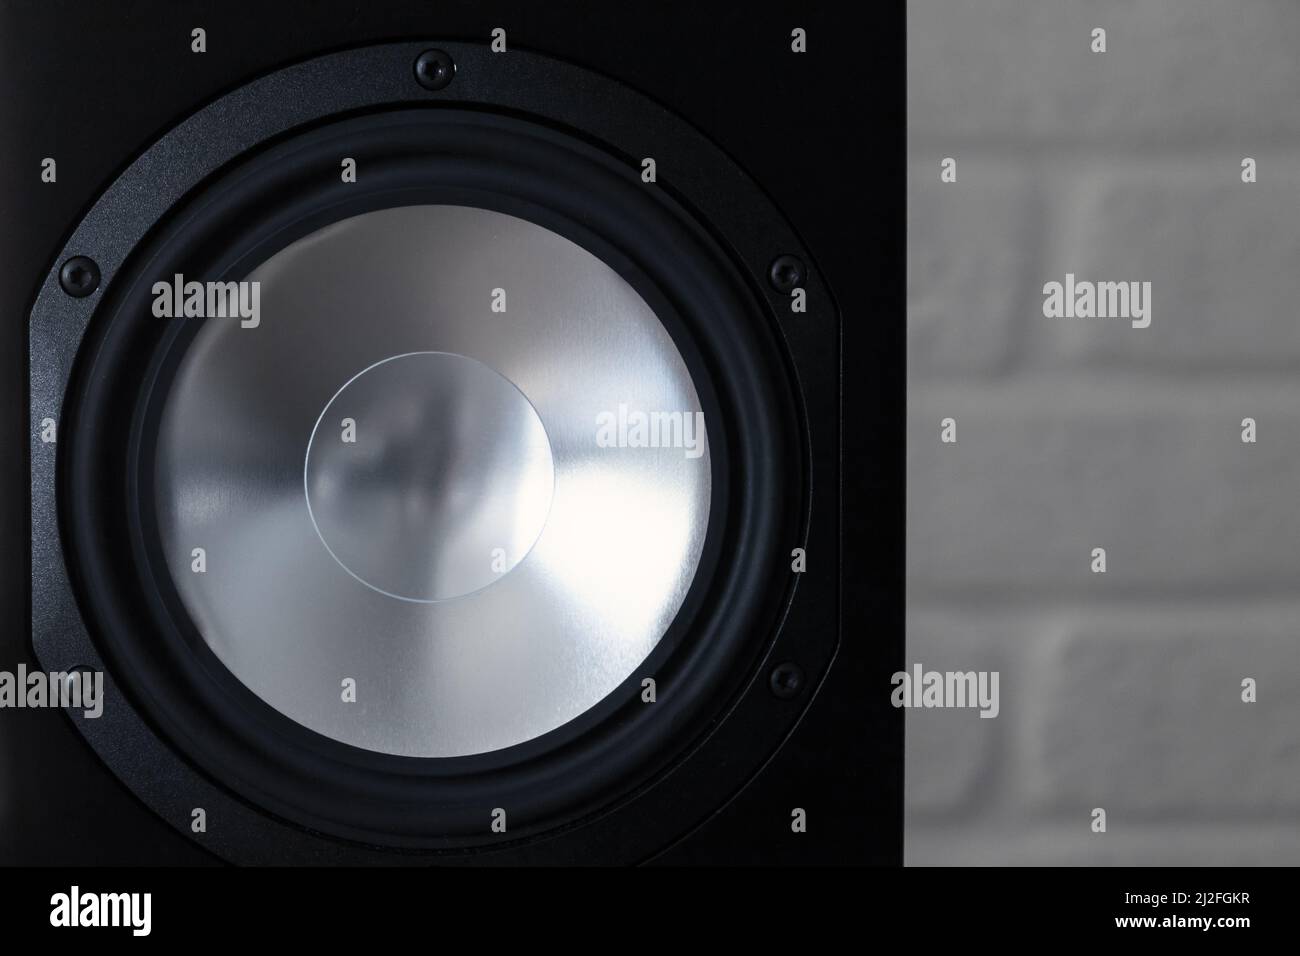 Shiny audio speaker in black body, close-up photo with selective soft focus Stock Photo